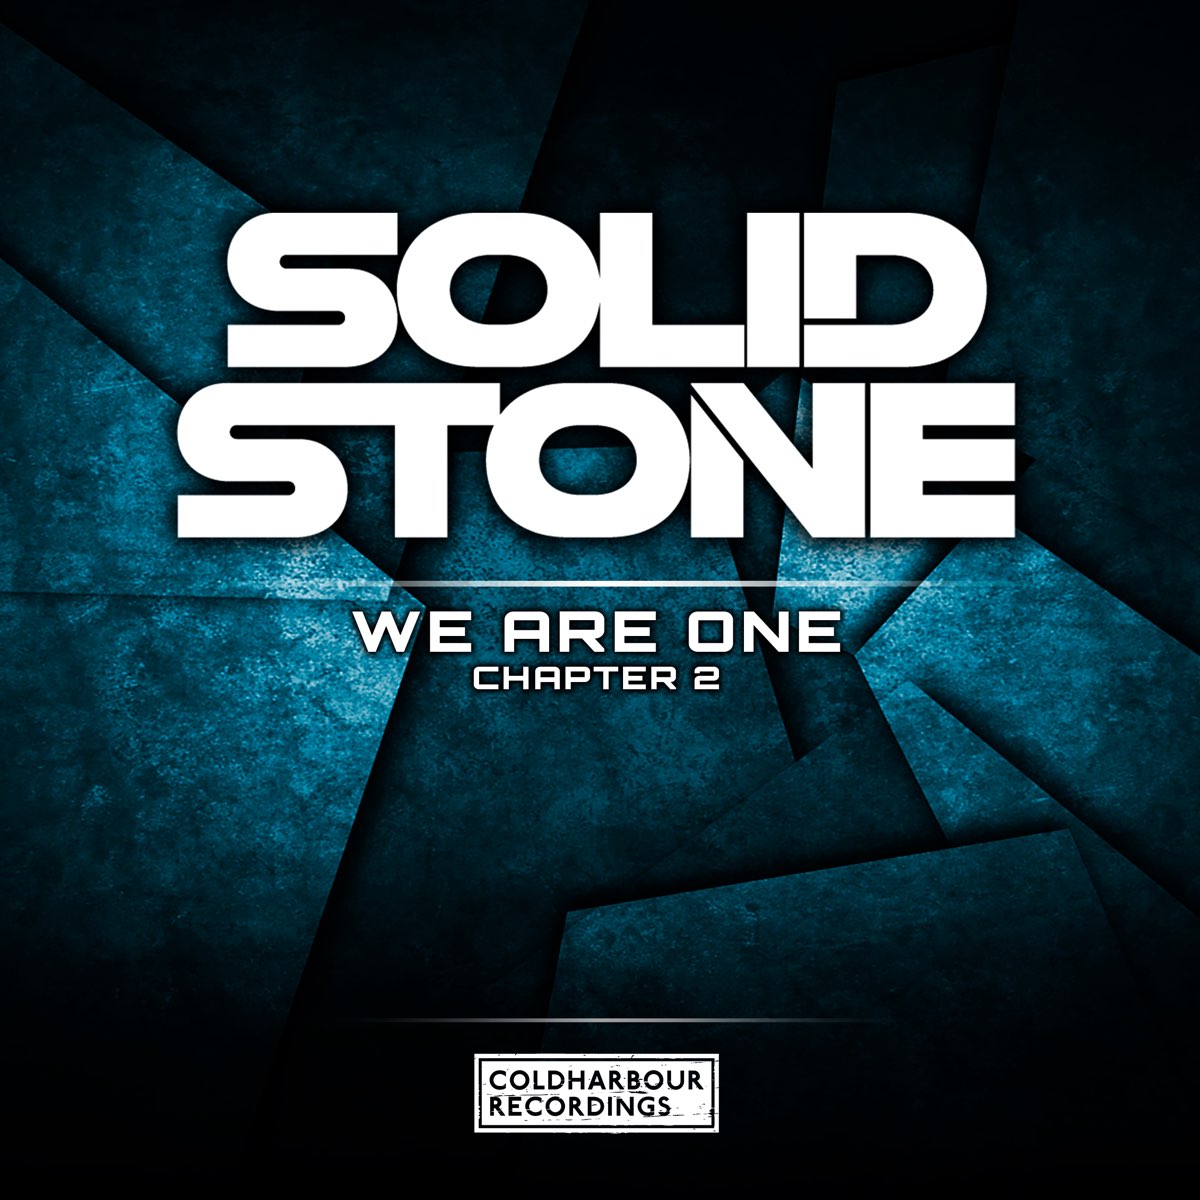 Solid stone. Solid Stone Black Market. Coldharbour. Coldharbour recordings CD. Featuring.